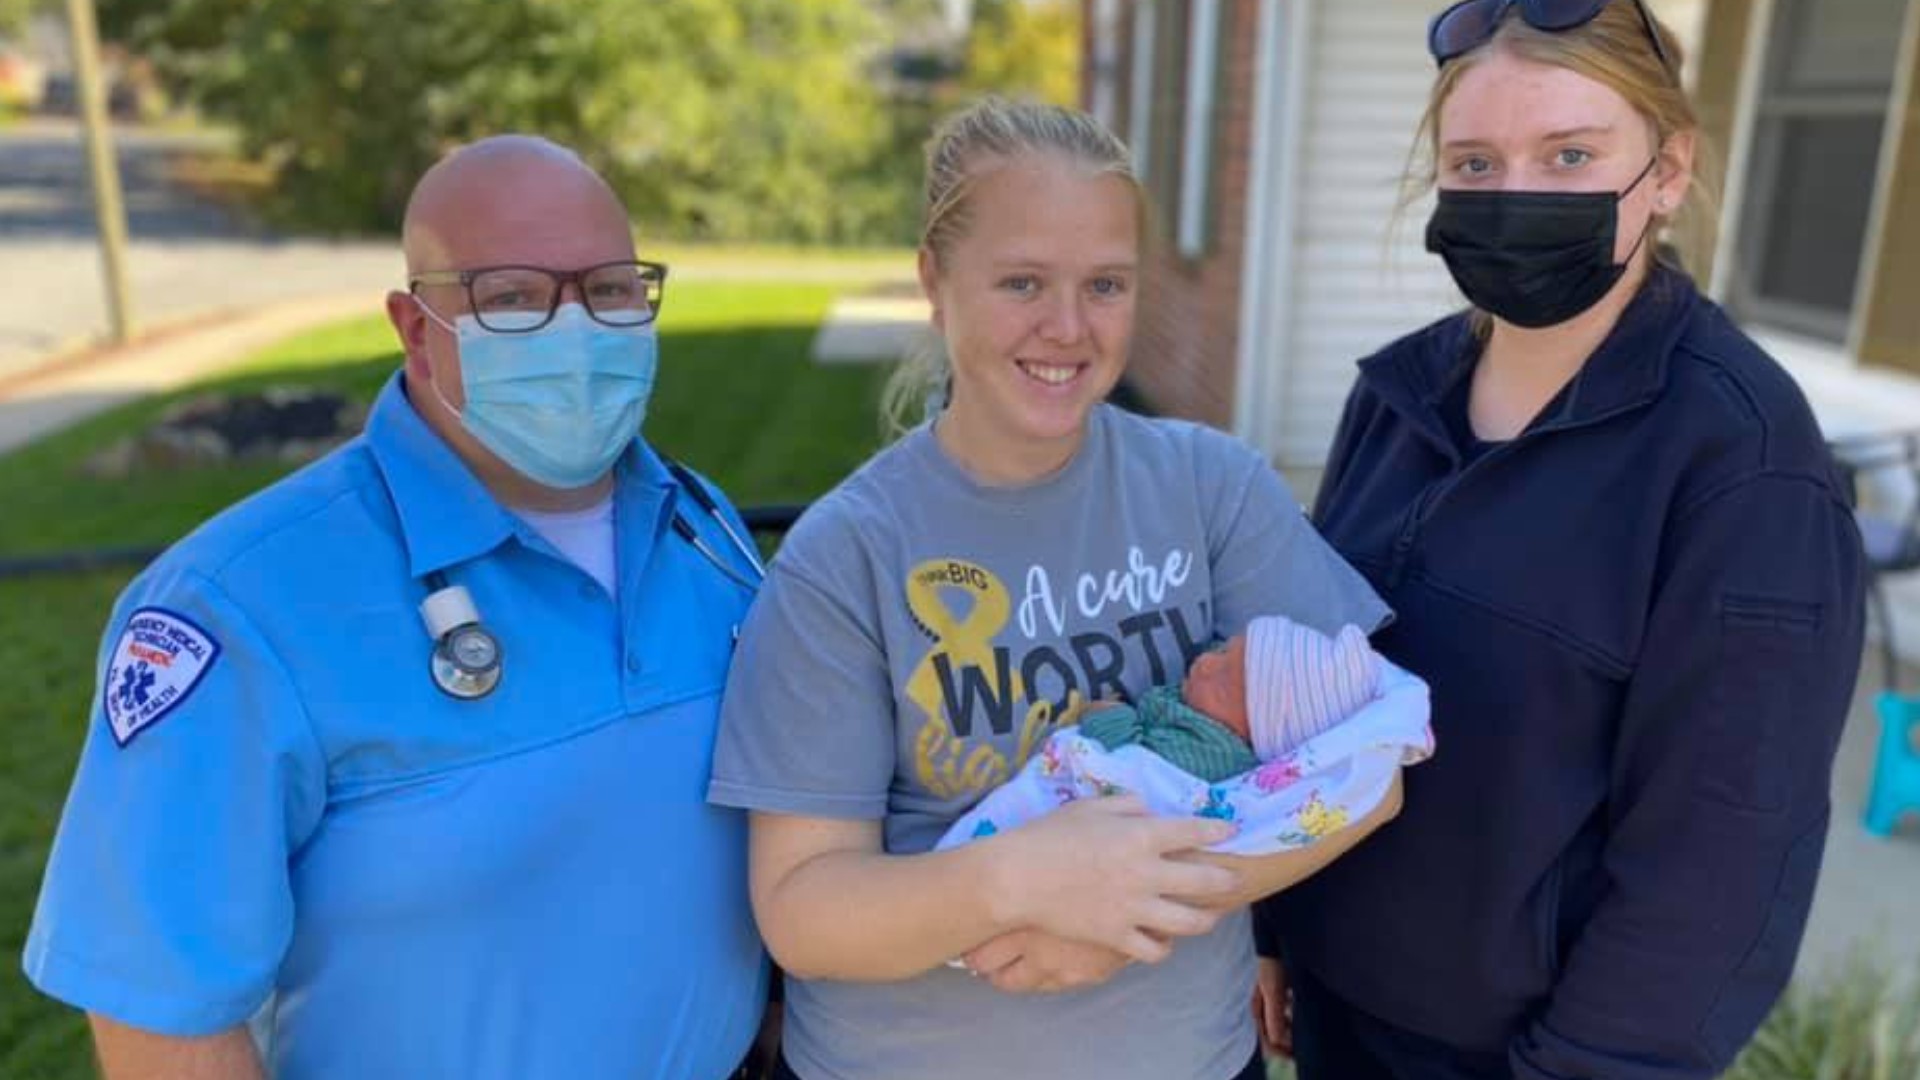 Mom Rachael Smith wasn't due until mid-November. But to her surprise, she gave birth early in the back of an ambulance with the help of EMS.